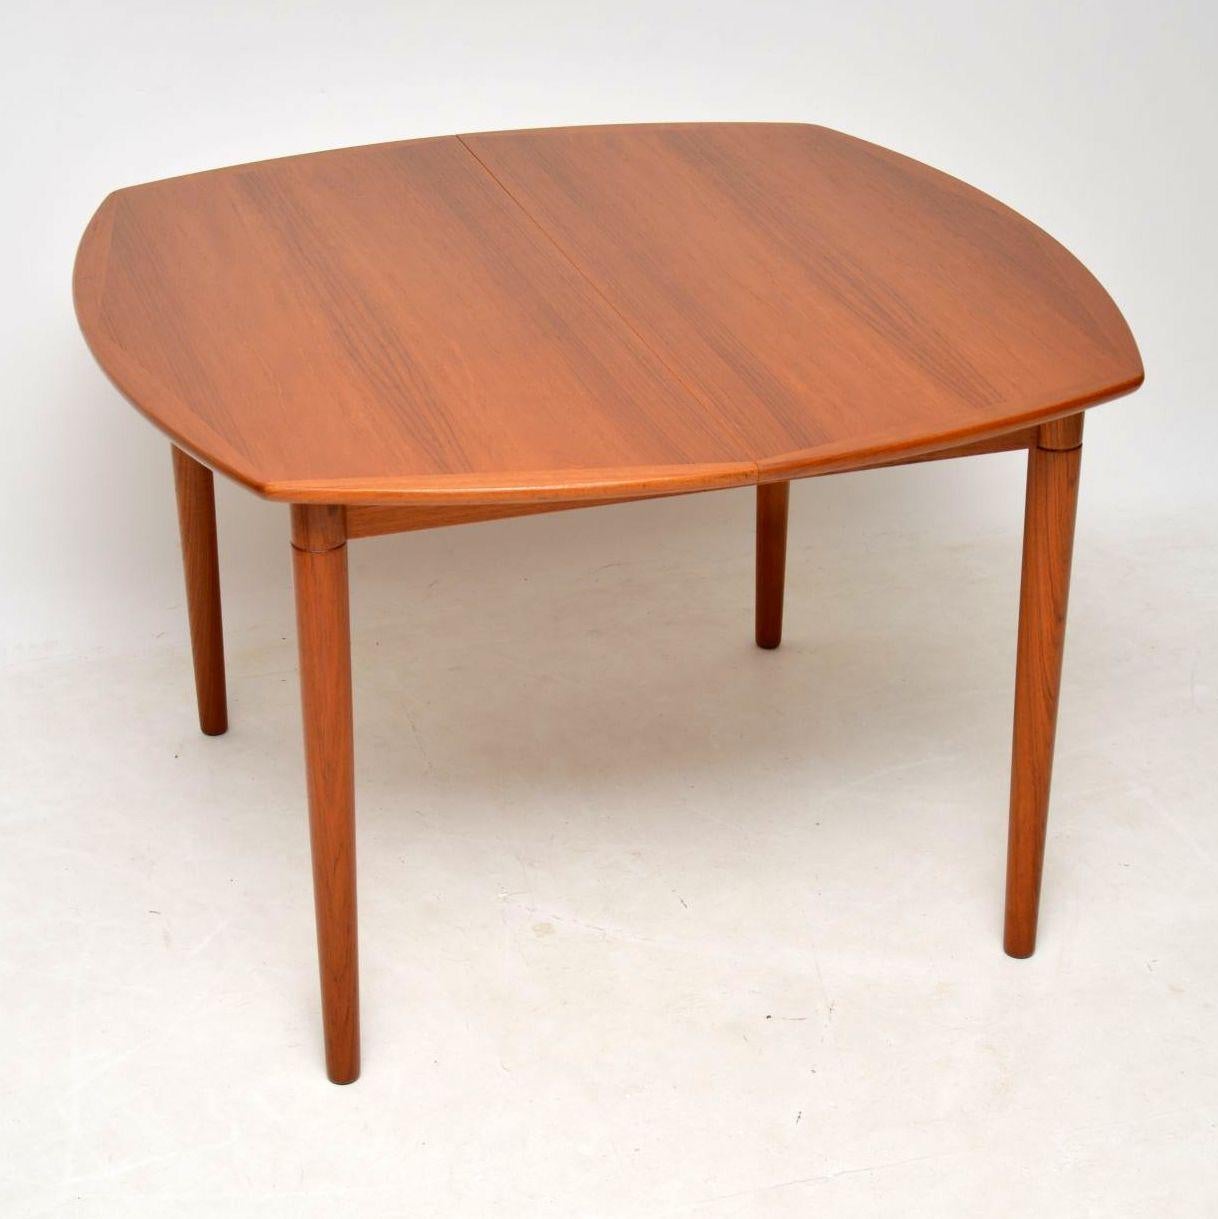 A stunning and very rare vintage extending dining table in teak, this was made in Norway during the 1960’s. It was designed by Gustav Bahus and made by Rastad & Relling. The quality is amazing, It has a lovely shape with slightly curved edges, and